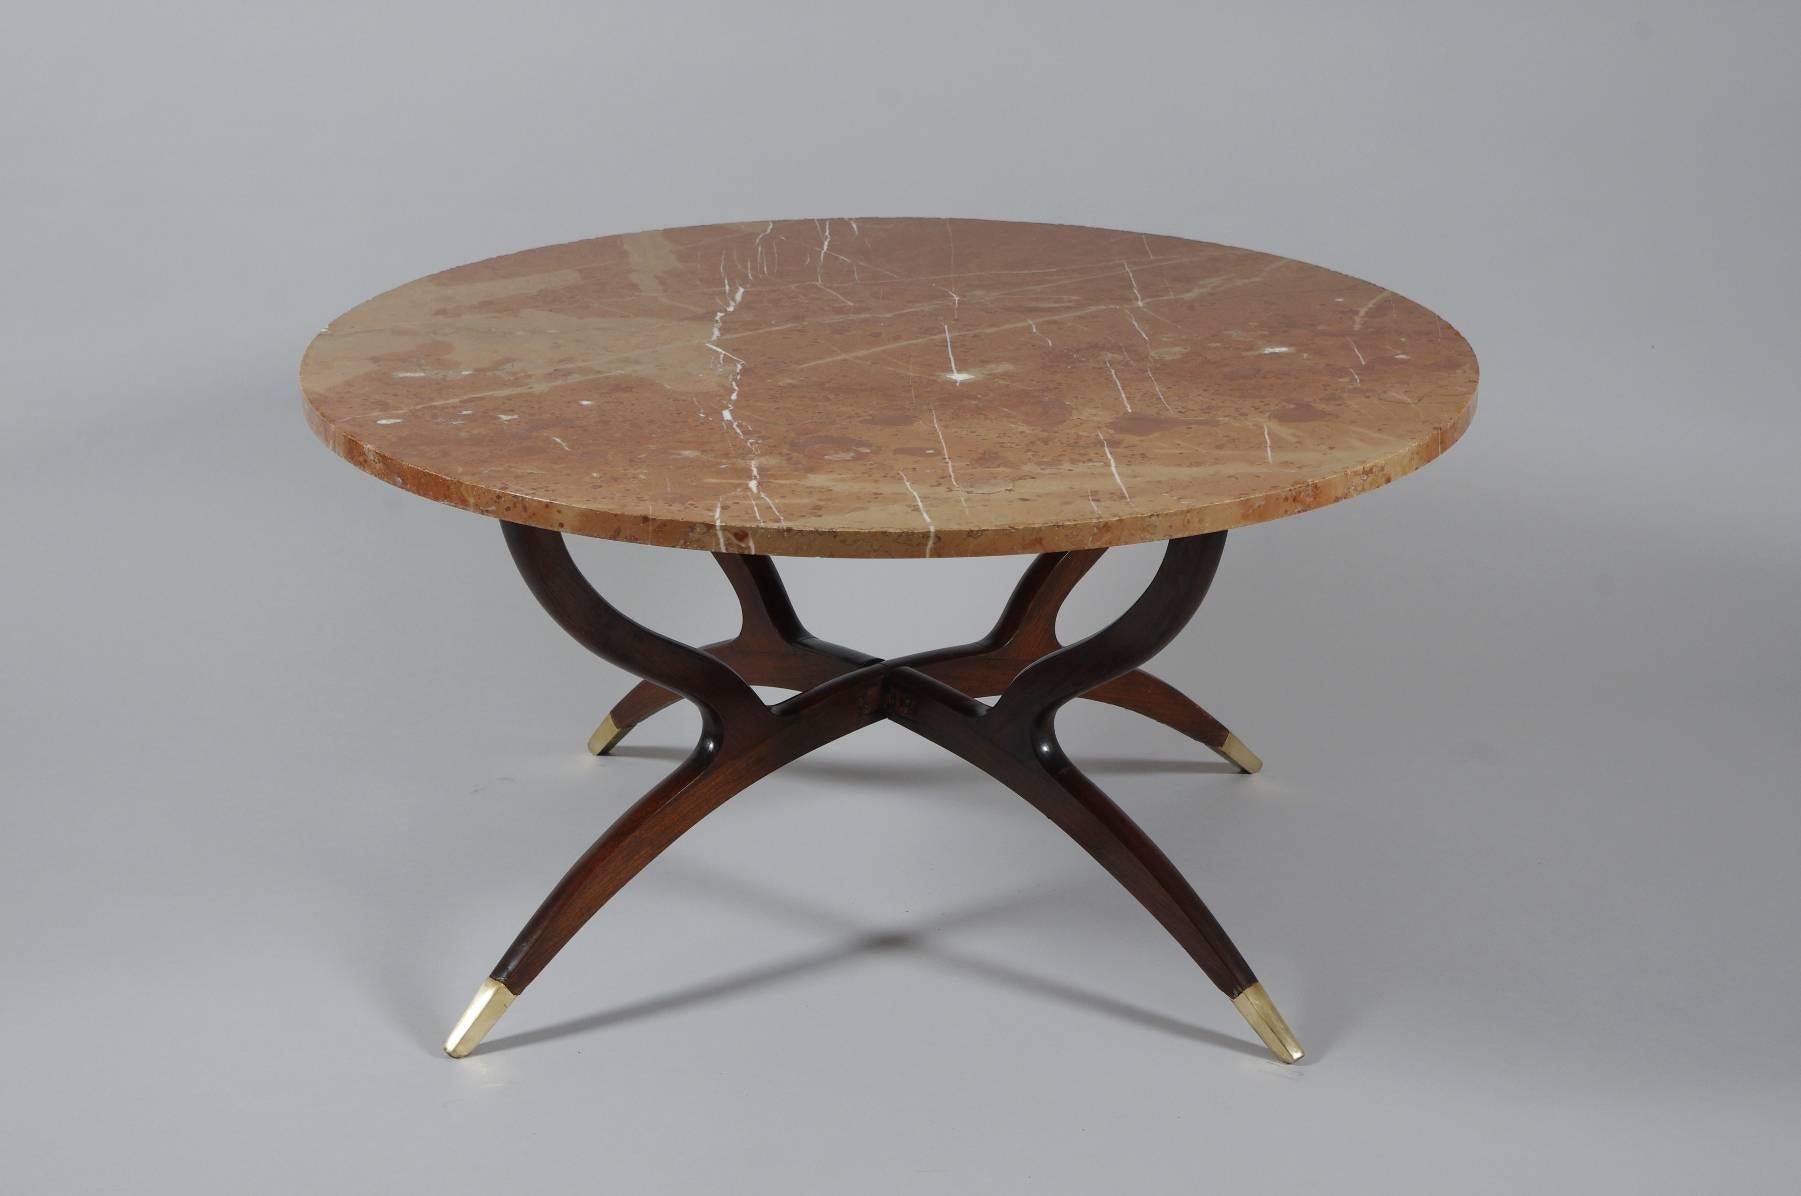 Elegant spider leg coffee table, the rose marble top on a folding curvilinear base with brass feet, reminiscent of Carlo de Carli.

Similar examples of this coffee table abound on 1st dibs, though none have a marble top. Some with brass trays are